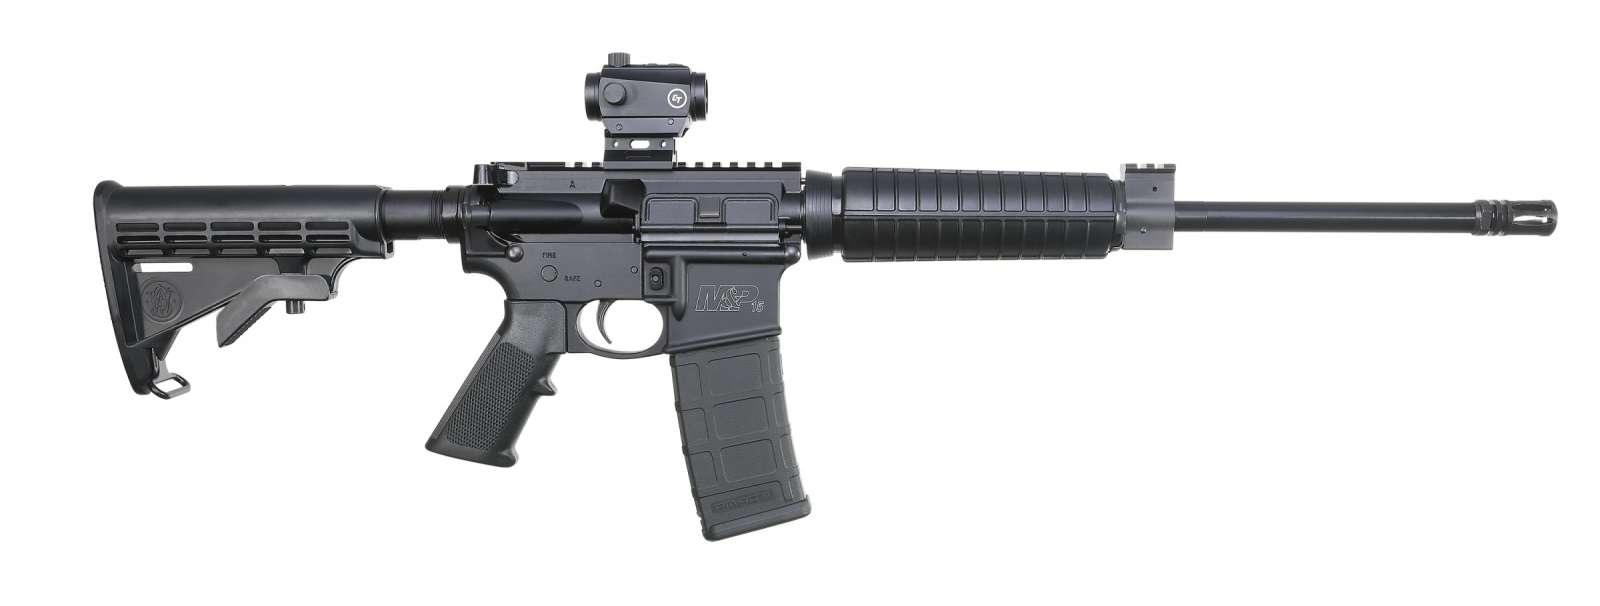 SMITH & WESSON M&P 15 SPORT II .223 REM/5.56 AR-15 RIFLE W/ CT RED/GREEN DOT OPTIC - 12936